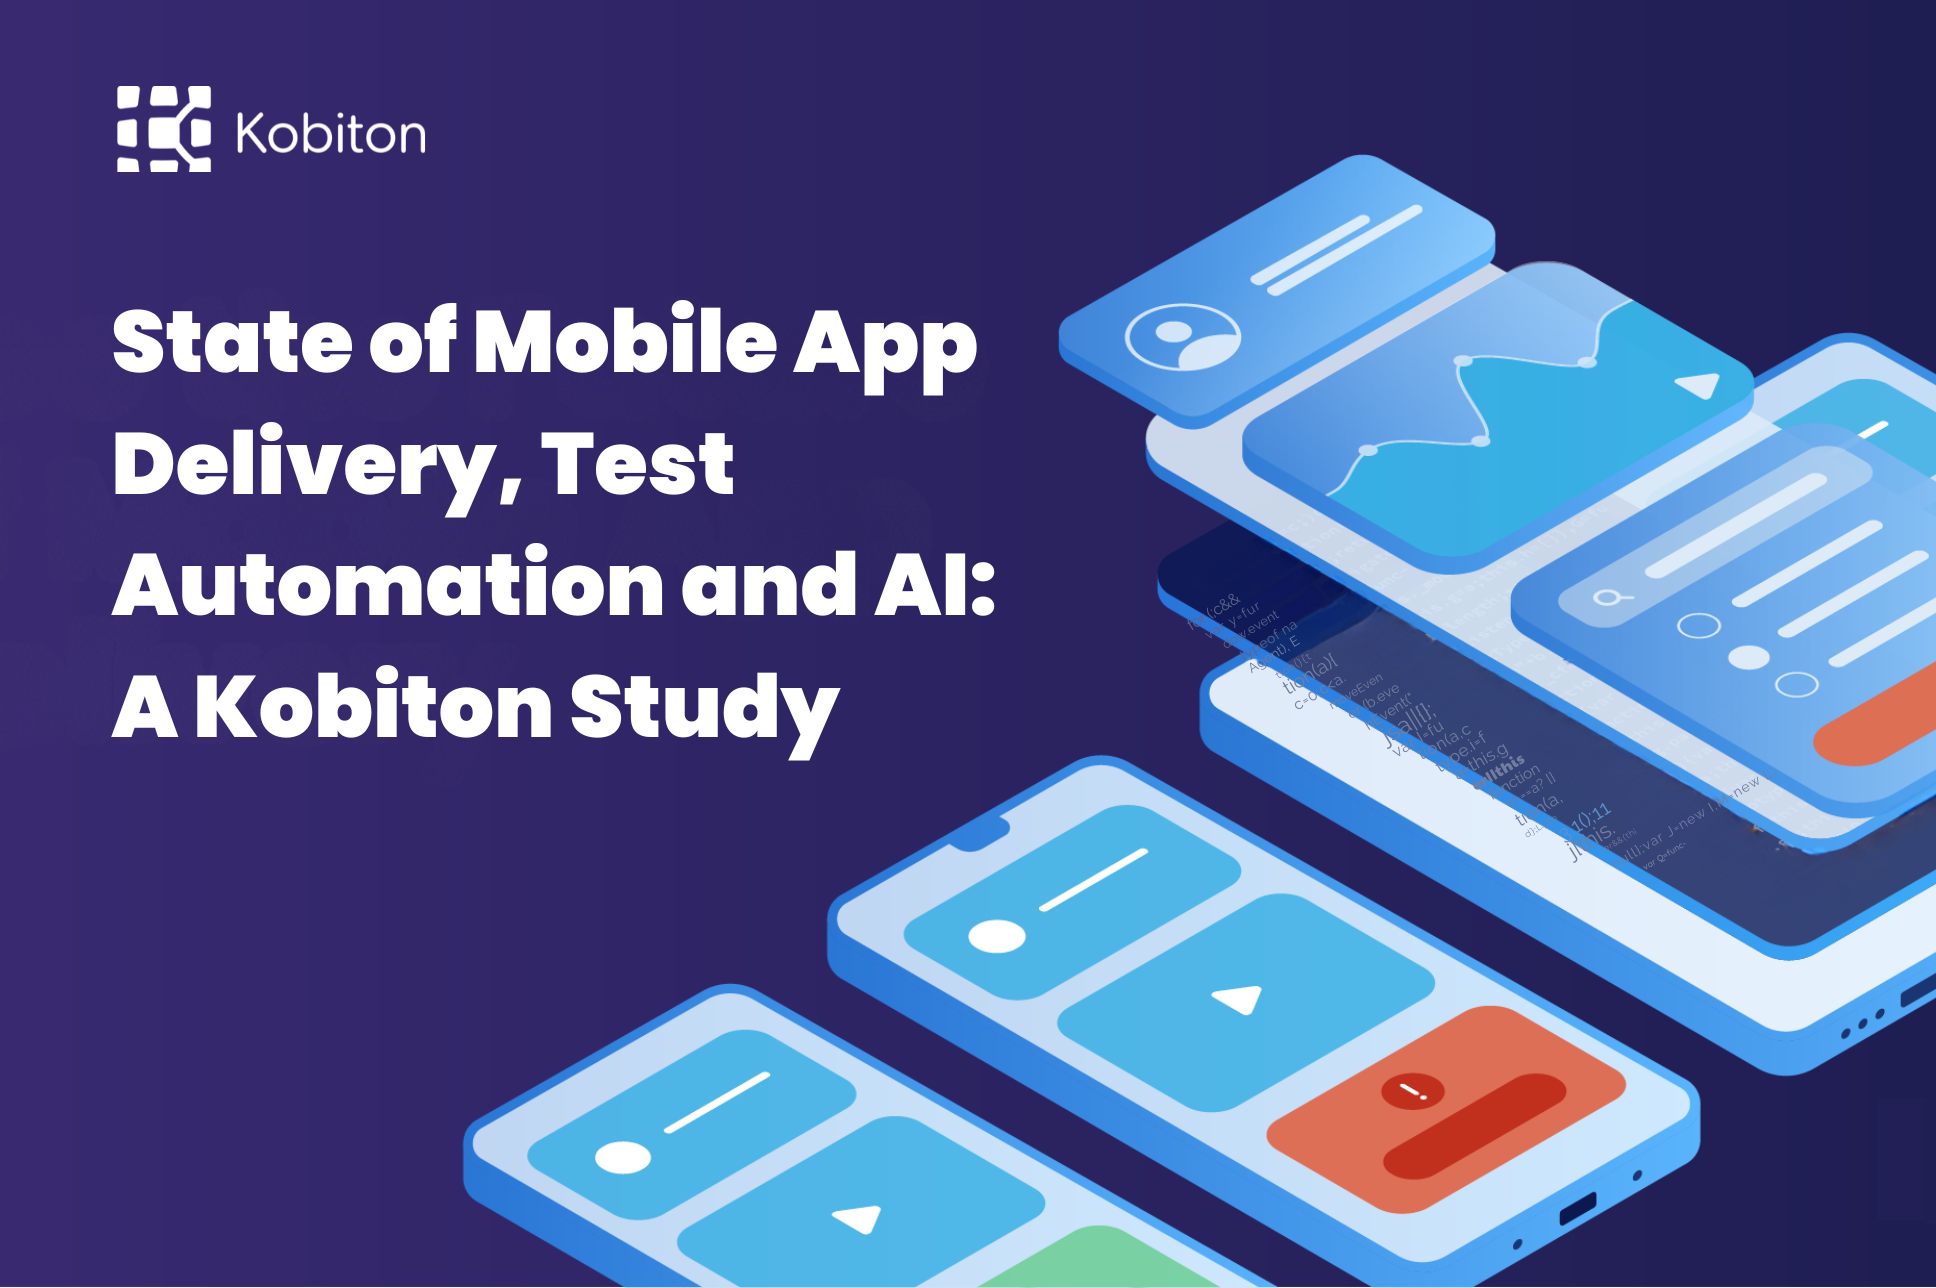 State of Mobile App Delivery, Test Automation and AI: A Kobiton Study